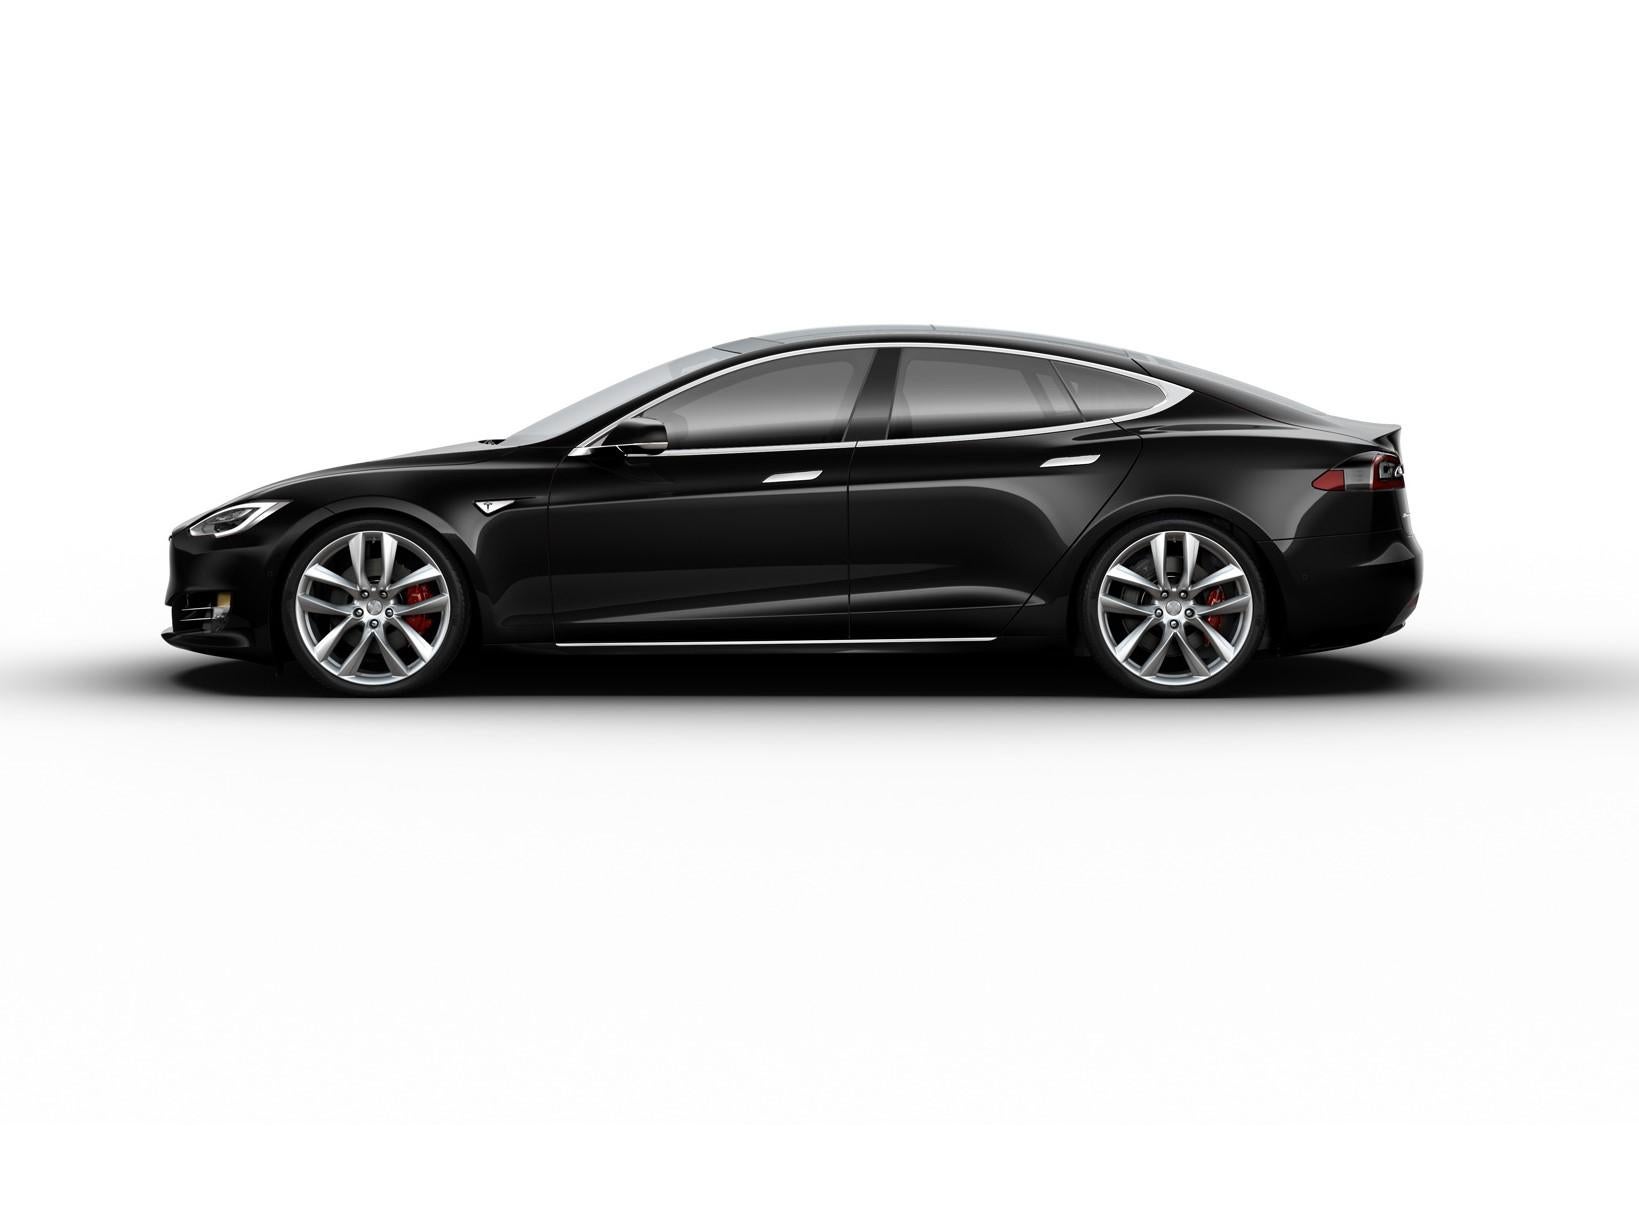 The Pwn2Own CanSecWest security conference is offering a brand new Tesla Model 3 to the first person to hack it